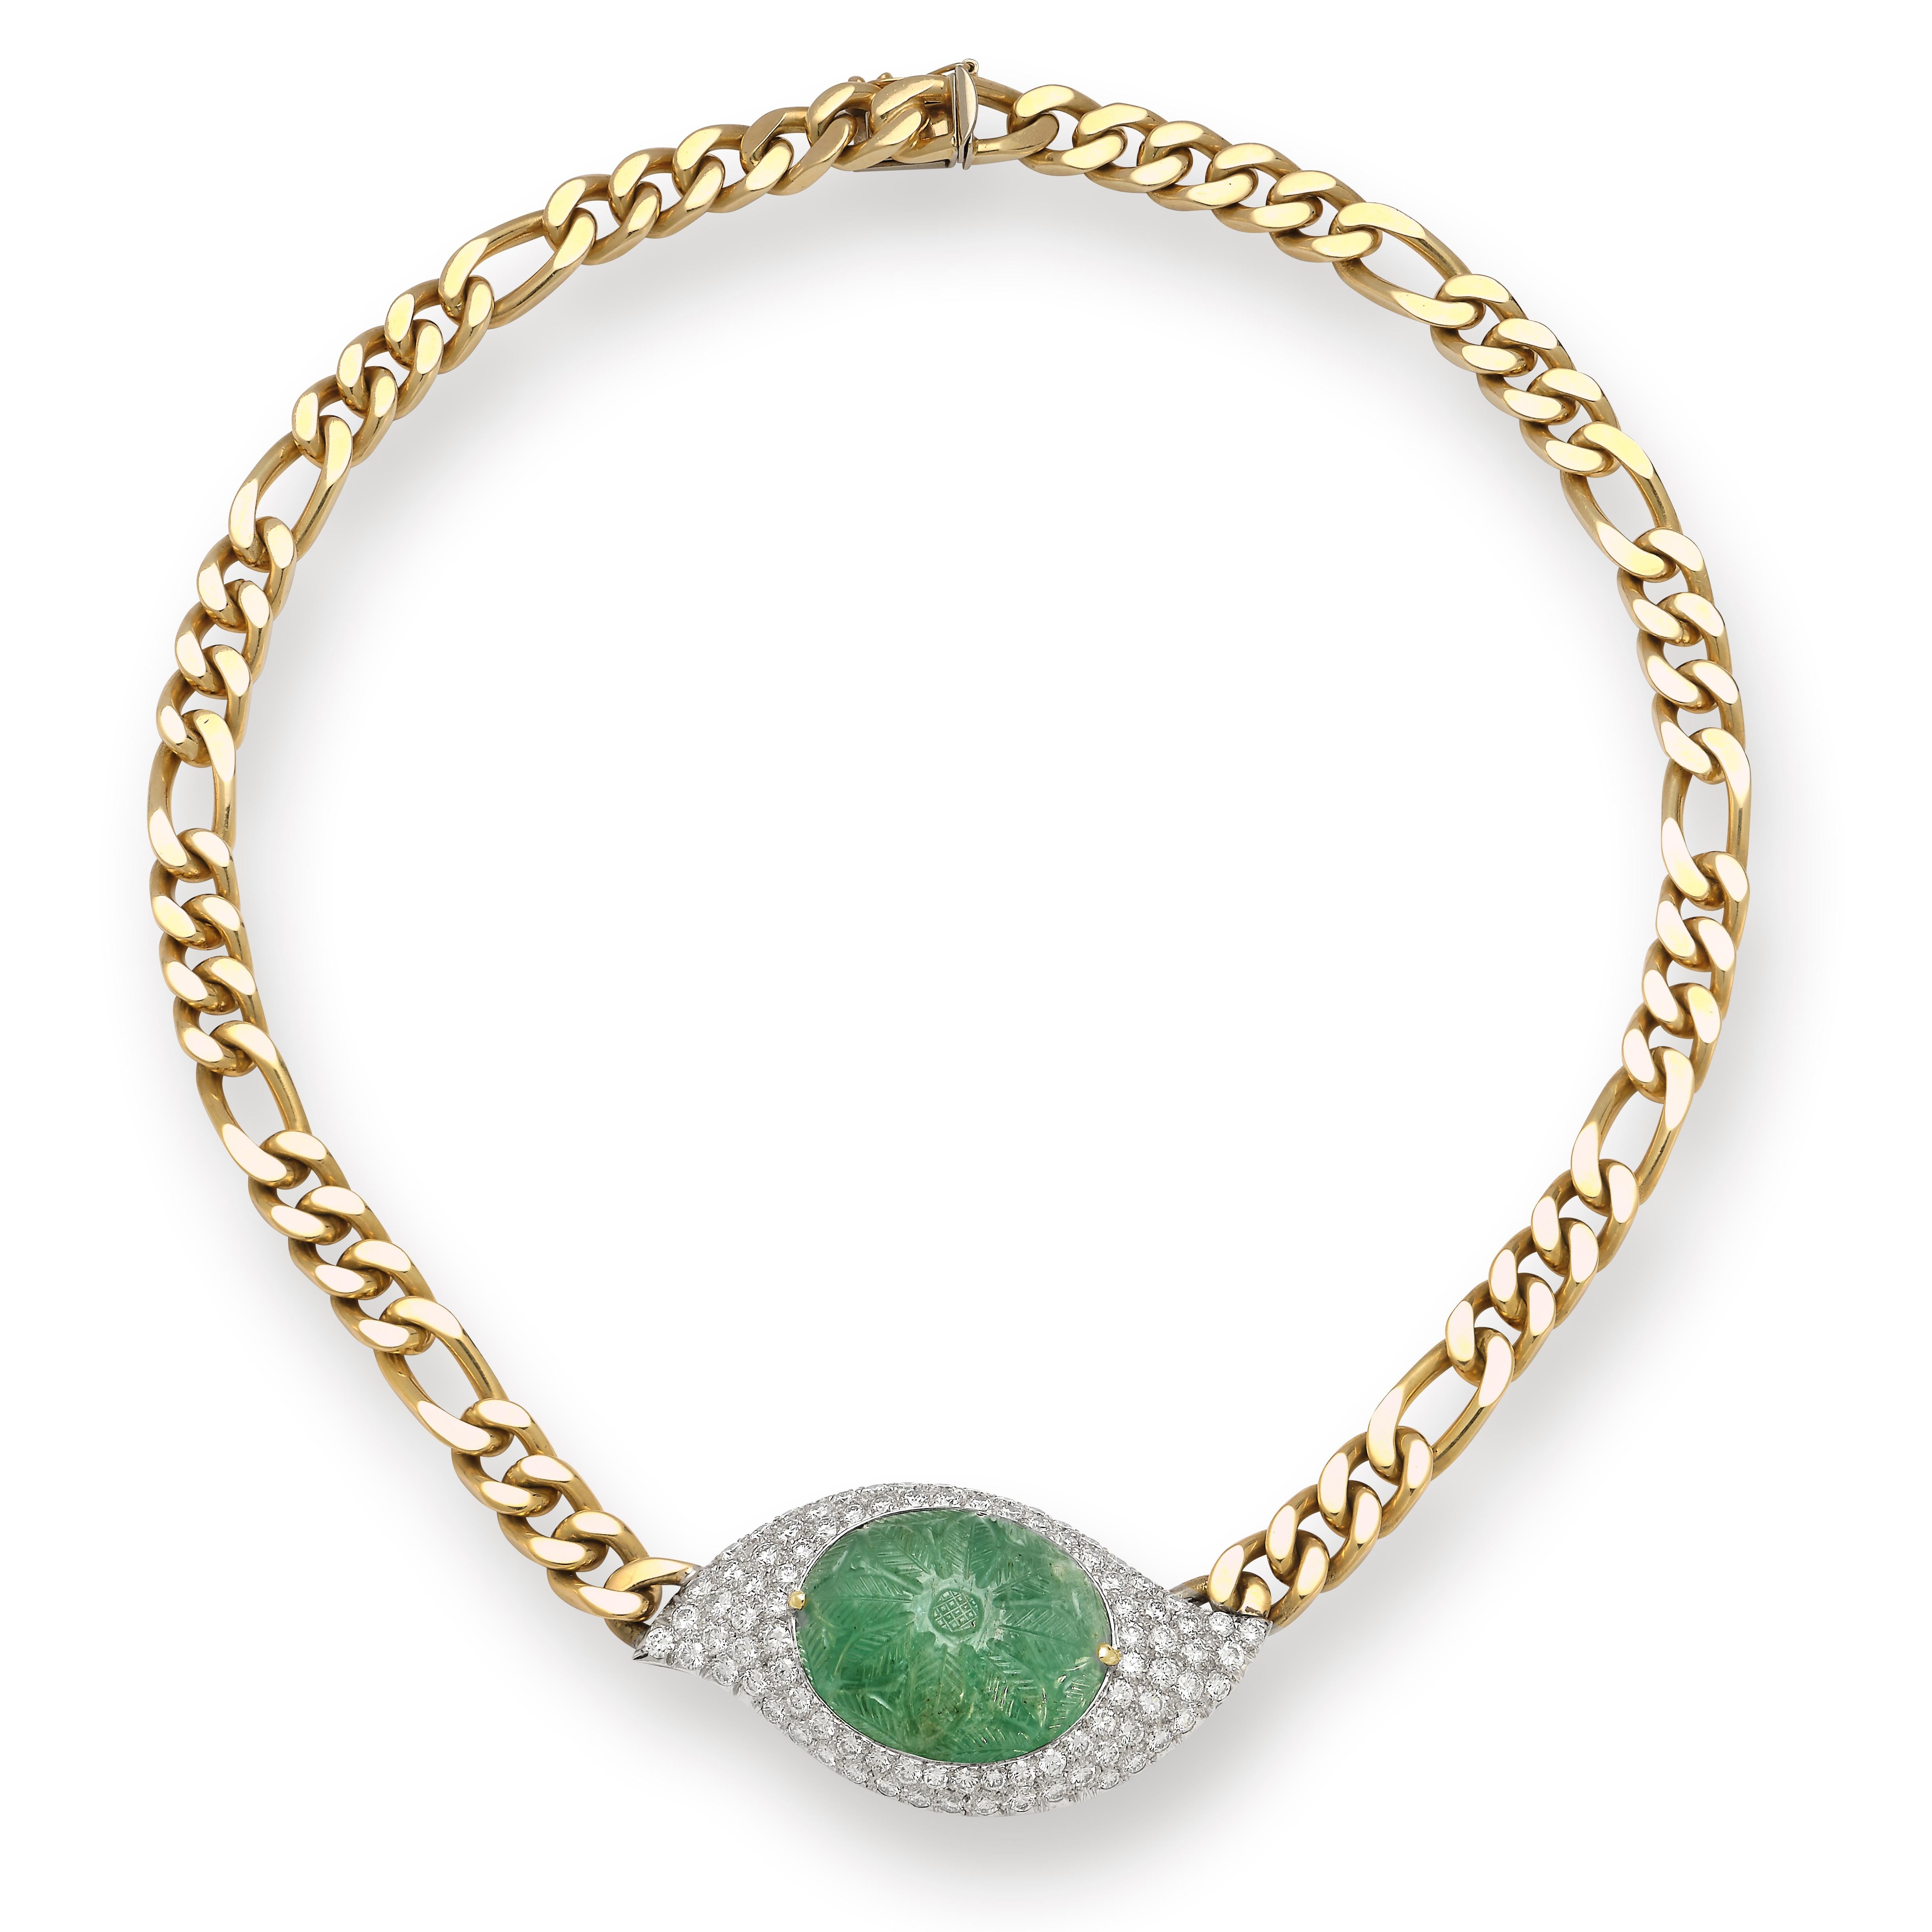 Carved Emerald & Diamond Link Necklace

 1 carved center emerald surrounded by 119 round pave diamonds

18k yellow gold chain

Diamond Weight: approximately 10.98 cts 

Measurements: 16